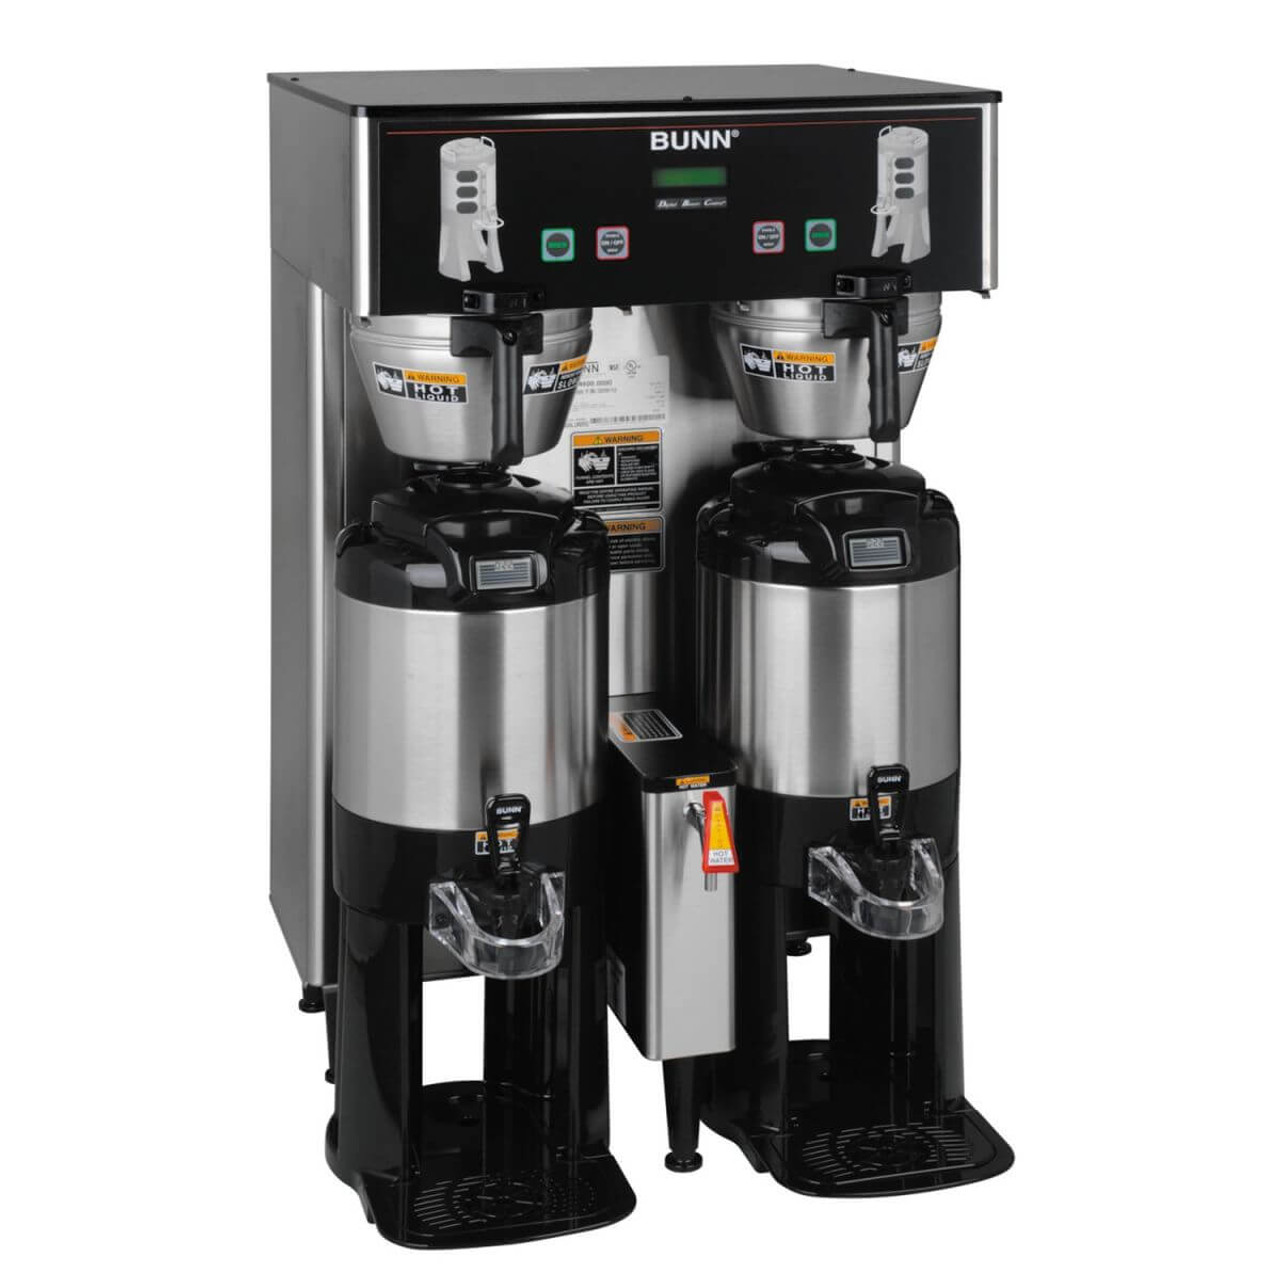 Bunn 34600.0000 BrewWISE Dual ThermoFresh DBC Brewer with Funnel Lock